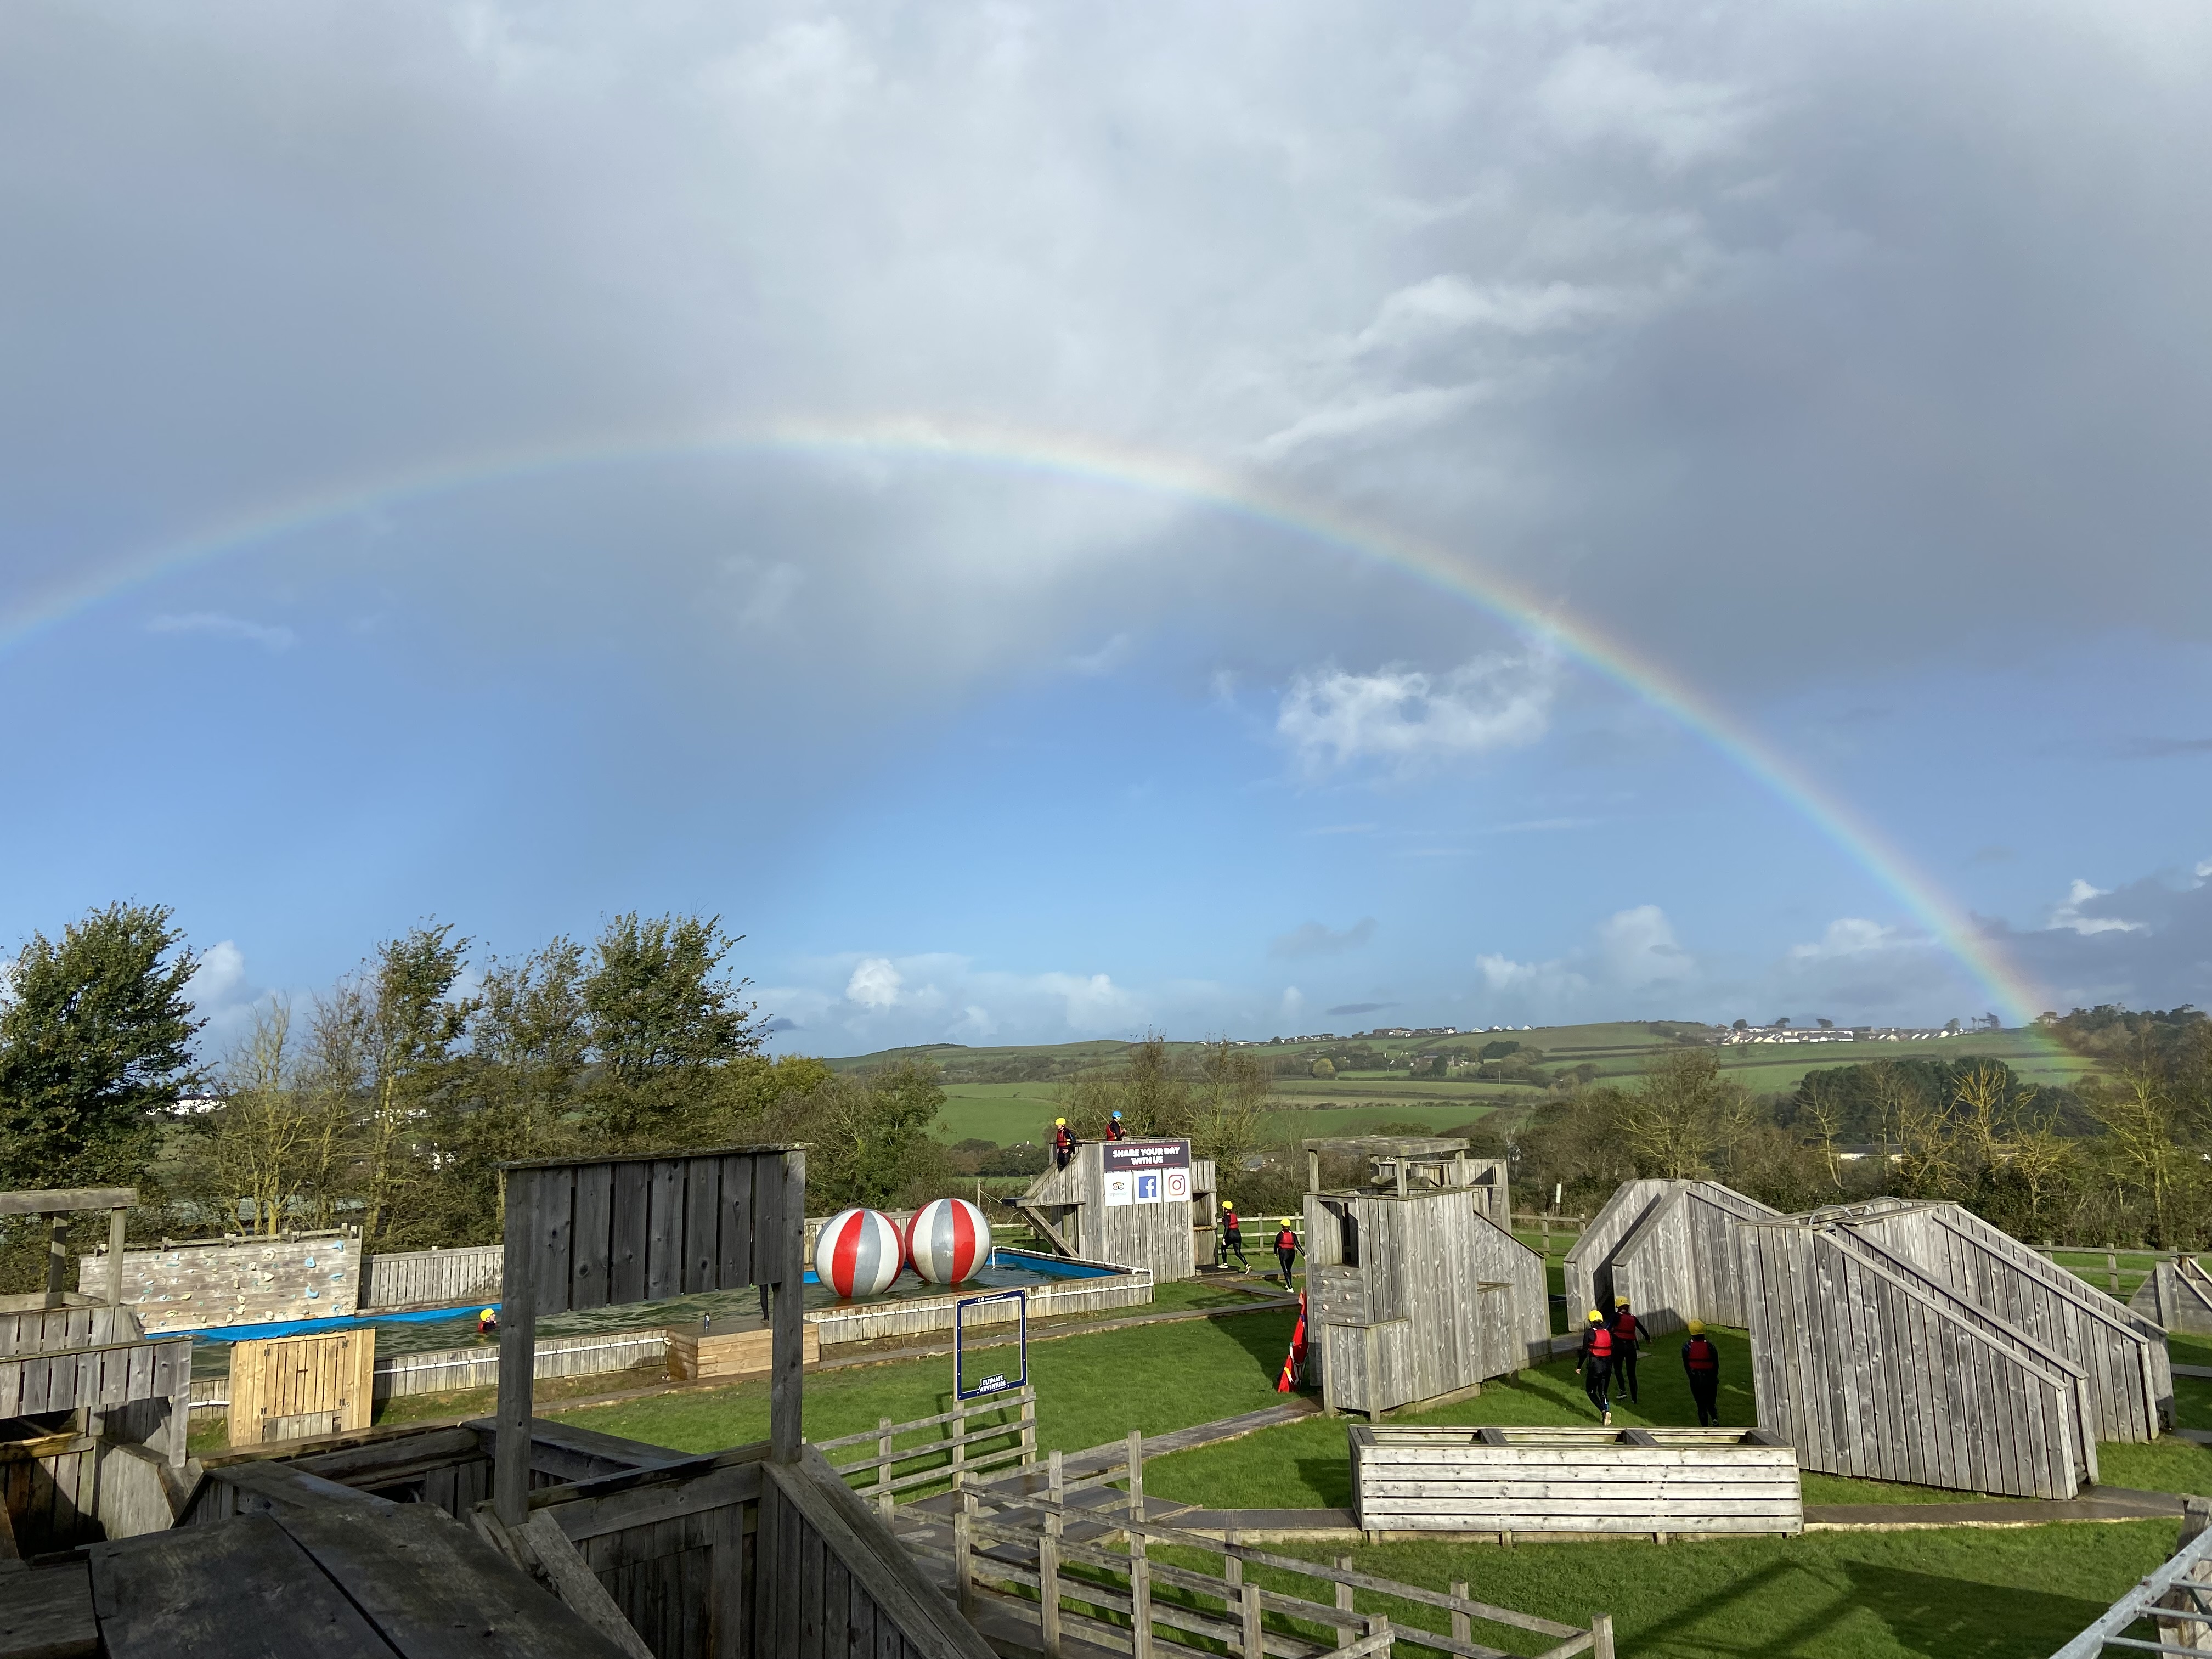 A rainbow in the sky sits over an ultimate assault course. The course features wooden wall climbs and a water challenge with giant inflatable balls.